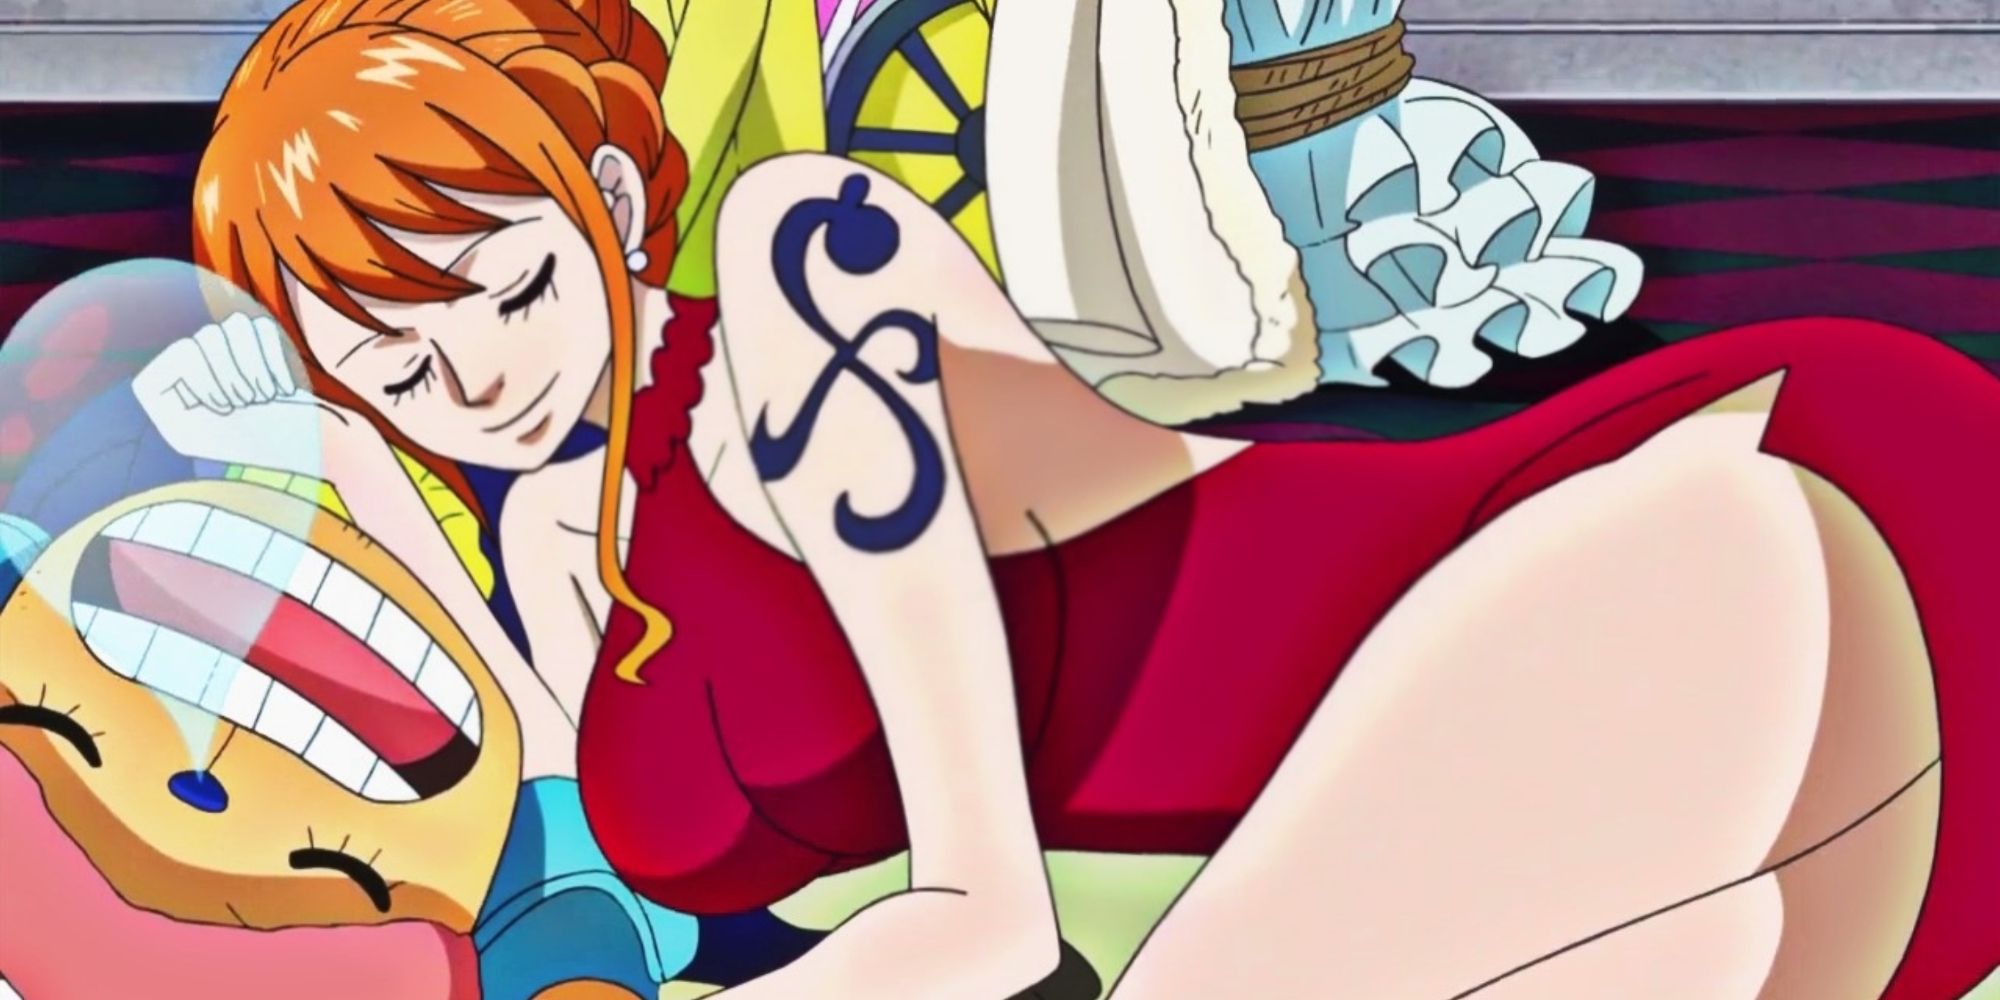 Chopper and Nami laying down during the Whole Cake Island arc in One Piece.